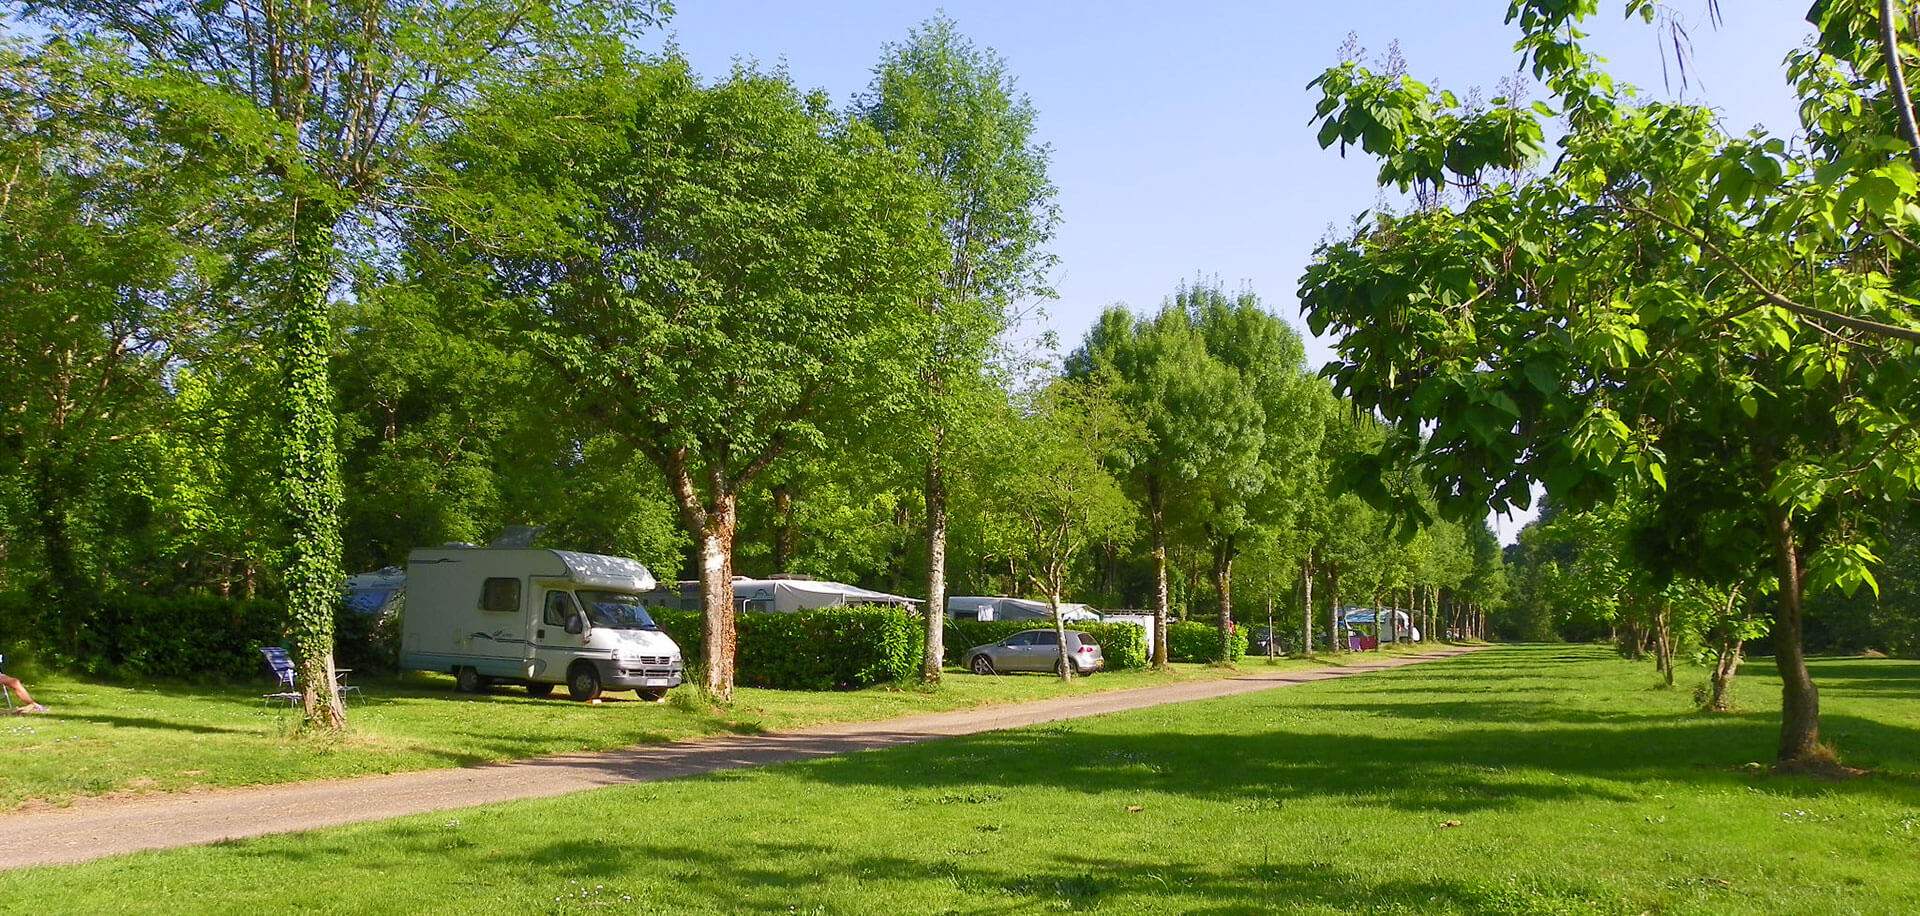 Pitches for motorhome campers in the Dordogne